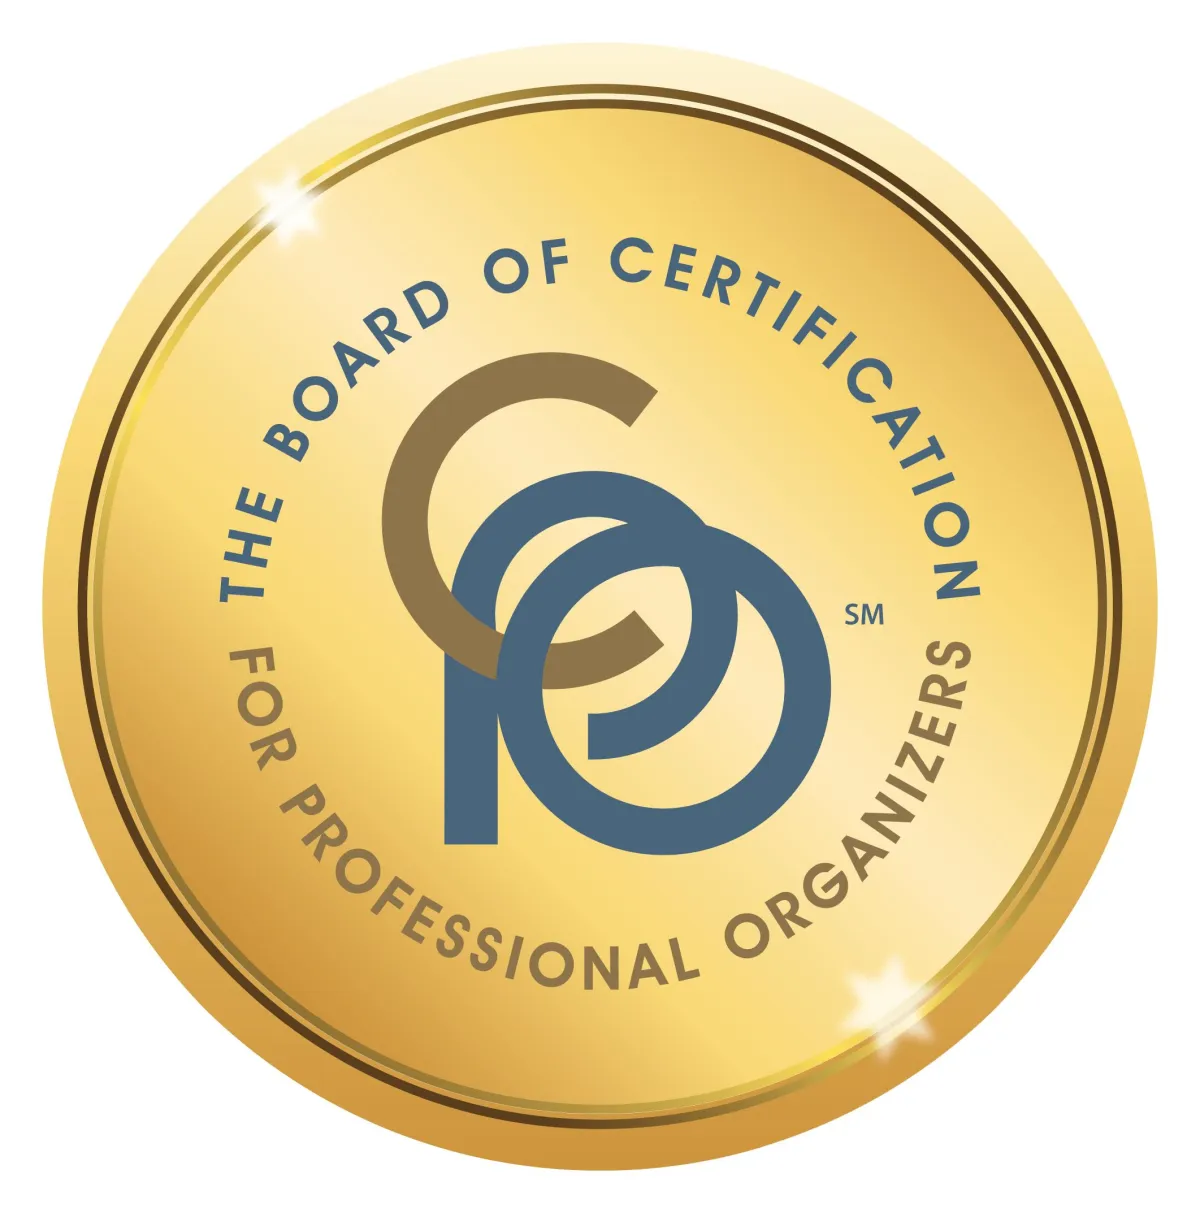 Board of Certification for Professional Organizers CPO Badge